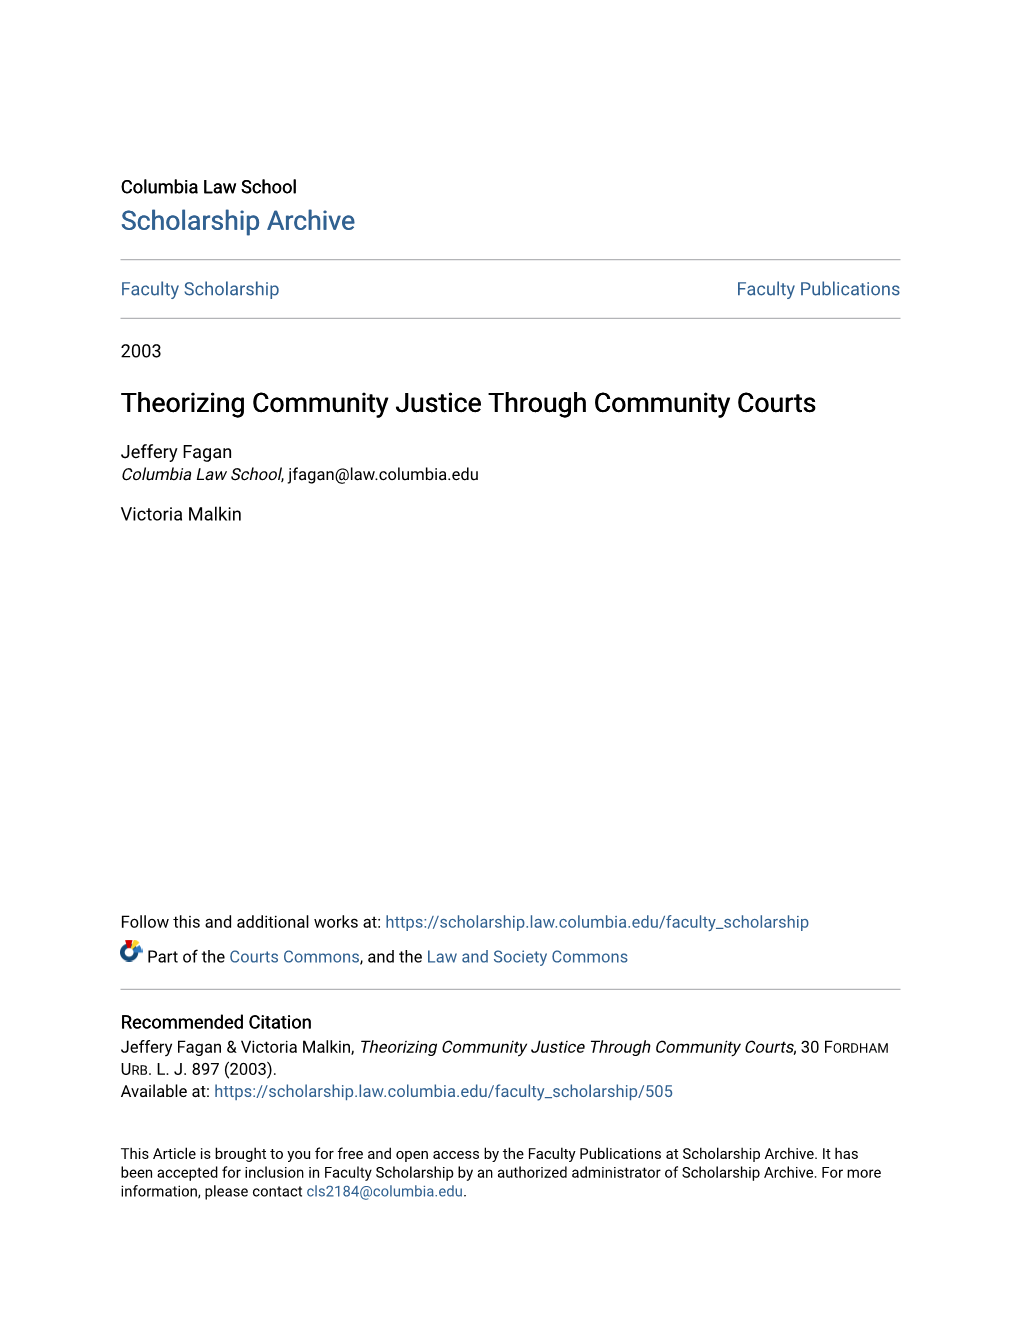 Theorizing Community Justice Through Community Courts